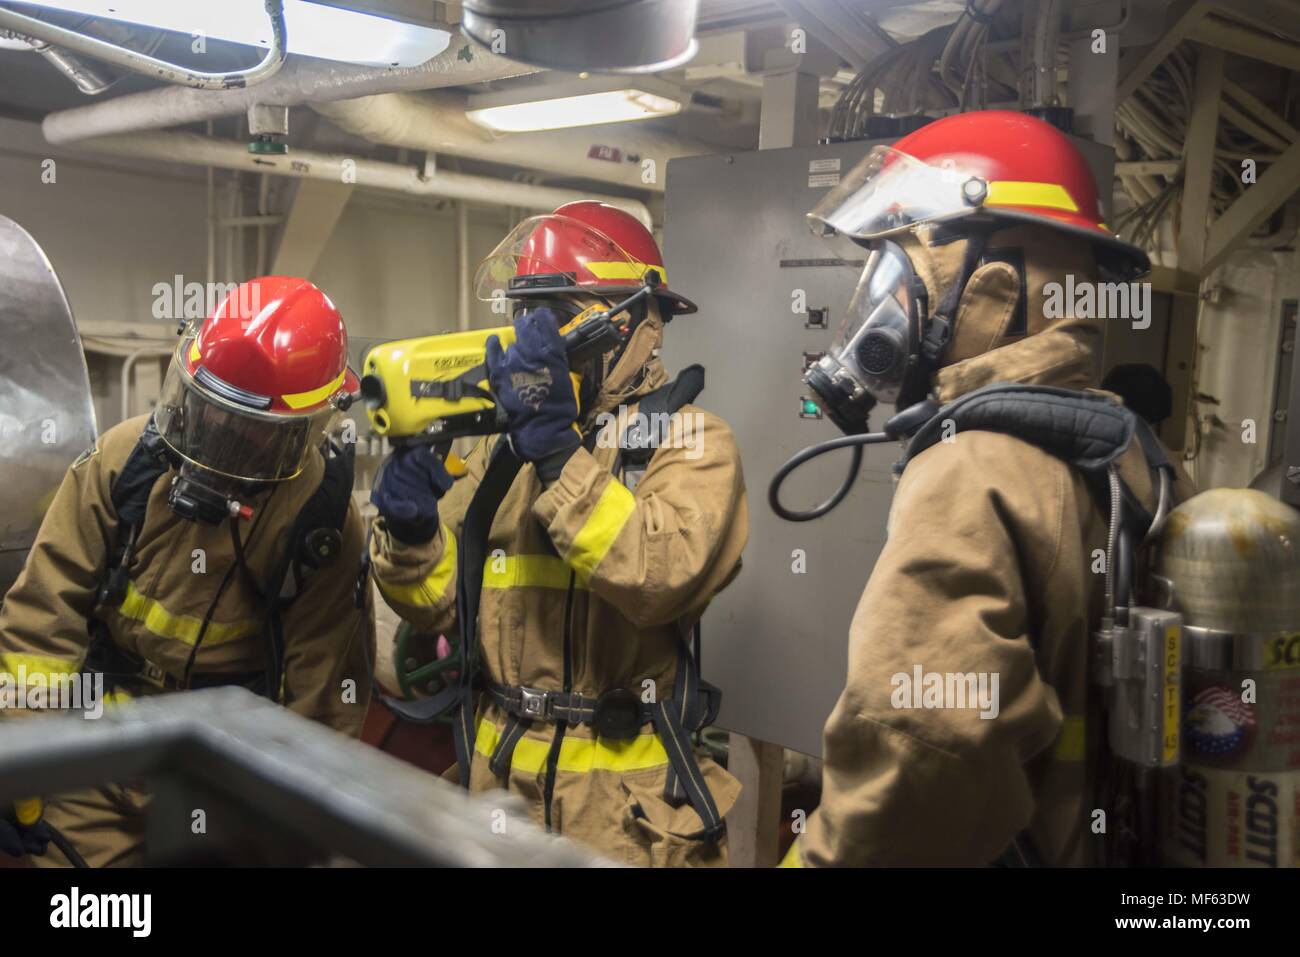 171031-N-DO281-050 ATLANTIC OCEAN (Oct. 31, 2017) Sailors respond to main engine room one during a main space fire drill, aboard the guided-missile cruiser USS Monterey (CG 61), October 31, 2017. Monterey is deployed in support of maritime security operations in the U.S. fifth and sixth fleet area of operations (U.S. Navy photo by Mass Communication Specialist Seaman Trey Fowler). () Stock Photo